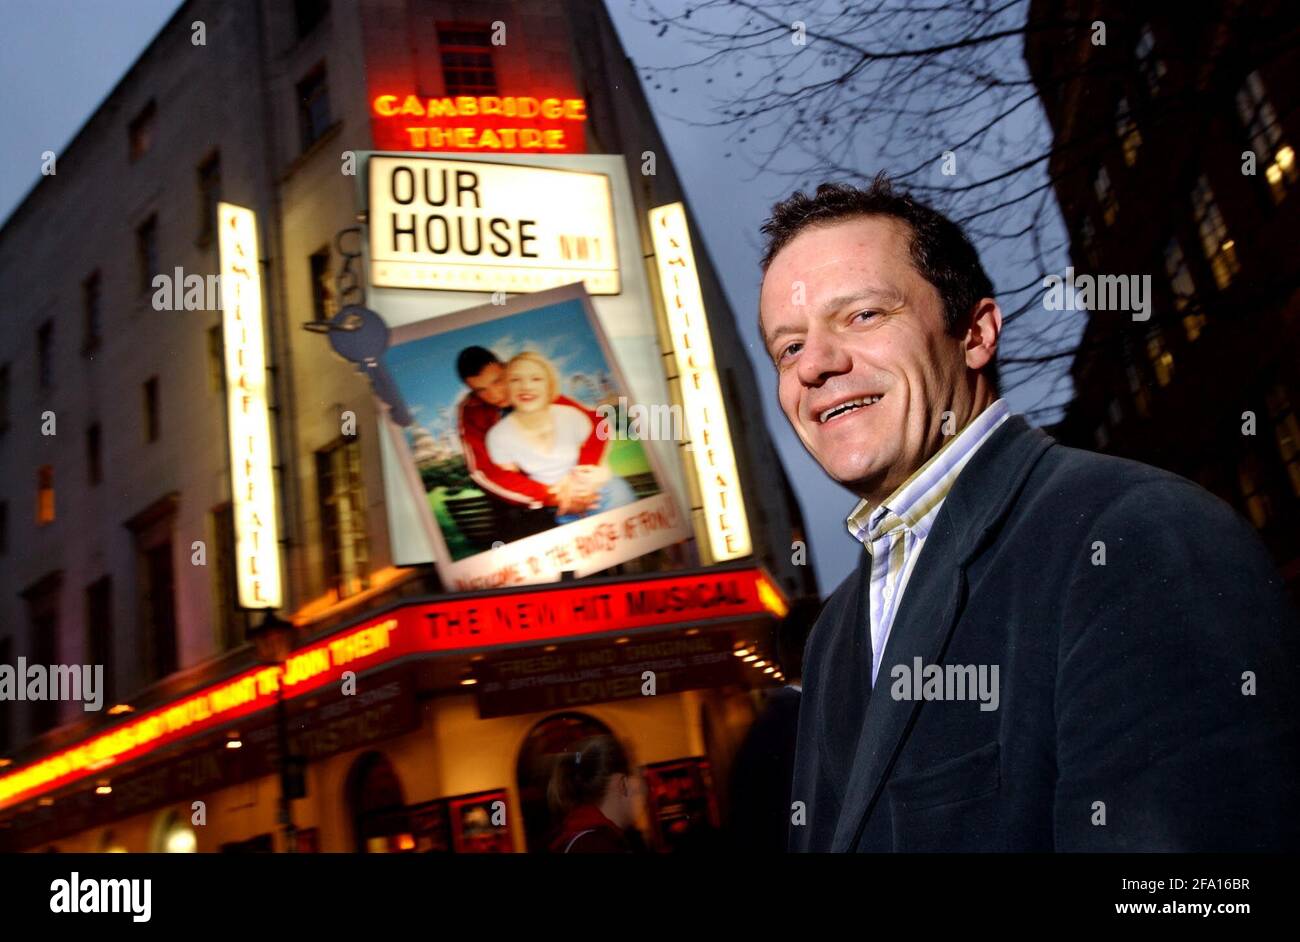 Theatrical Producer Paul Roberts outside the Cambridge Theatre in Covent Gaden.6 December 2002 photo Andy Paradise Stock Photo